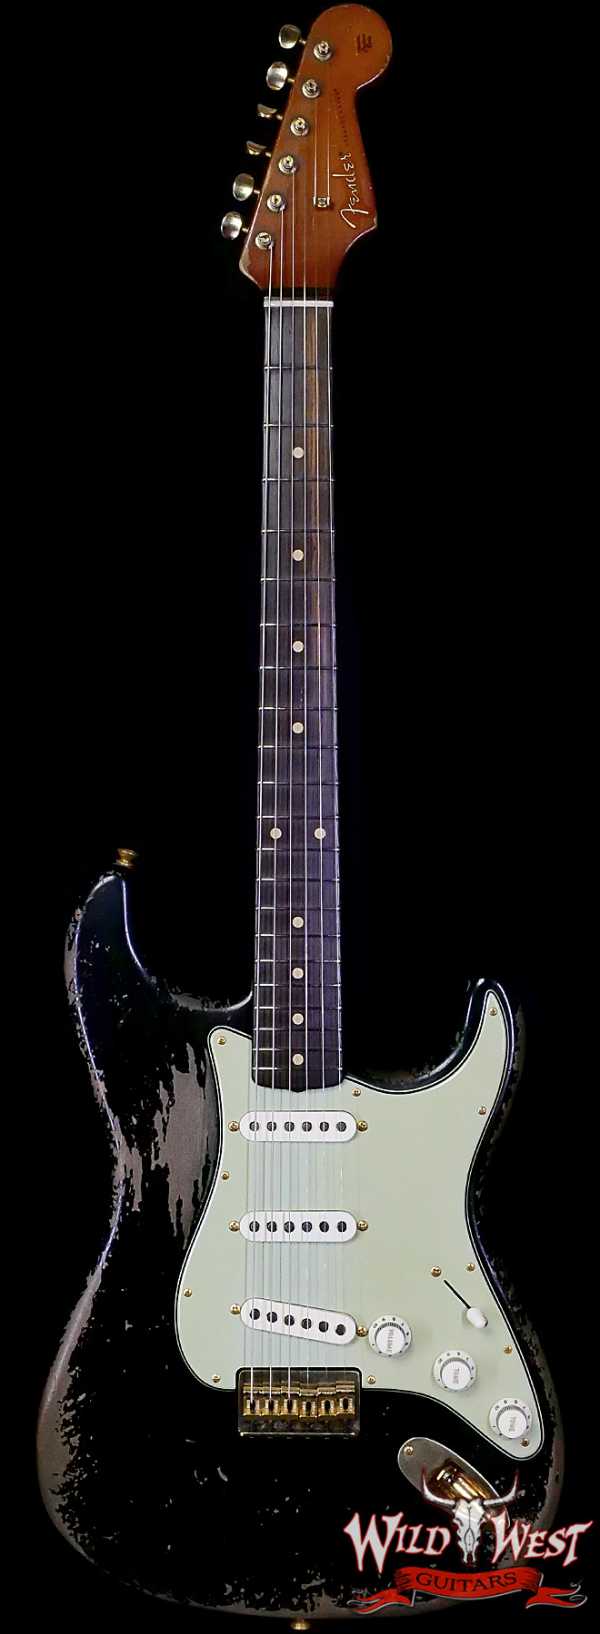 Fender Custom Shop Dale Wilson Masterbuilt 1961 Hardtail Stratocaster Hand-Wound Pickups Brazilian Rosewood Fingerboard Relic Black 6.90 LBS (US Only / No International Shipping)